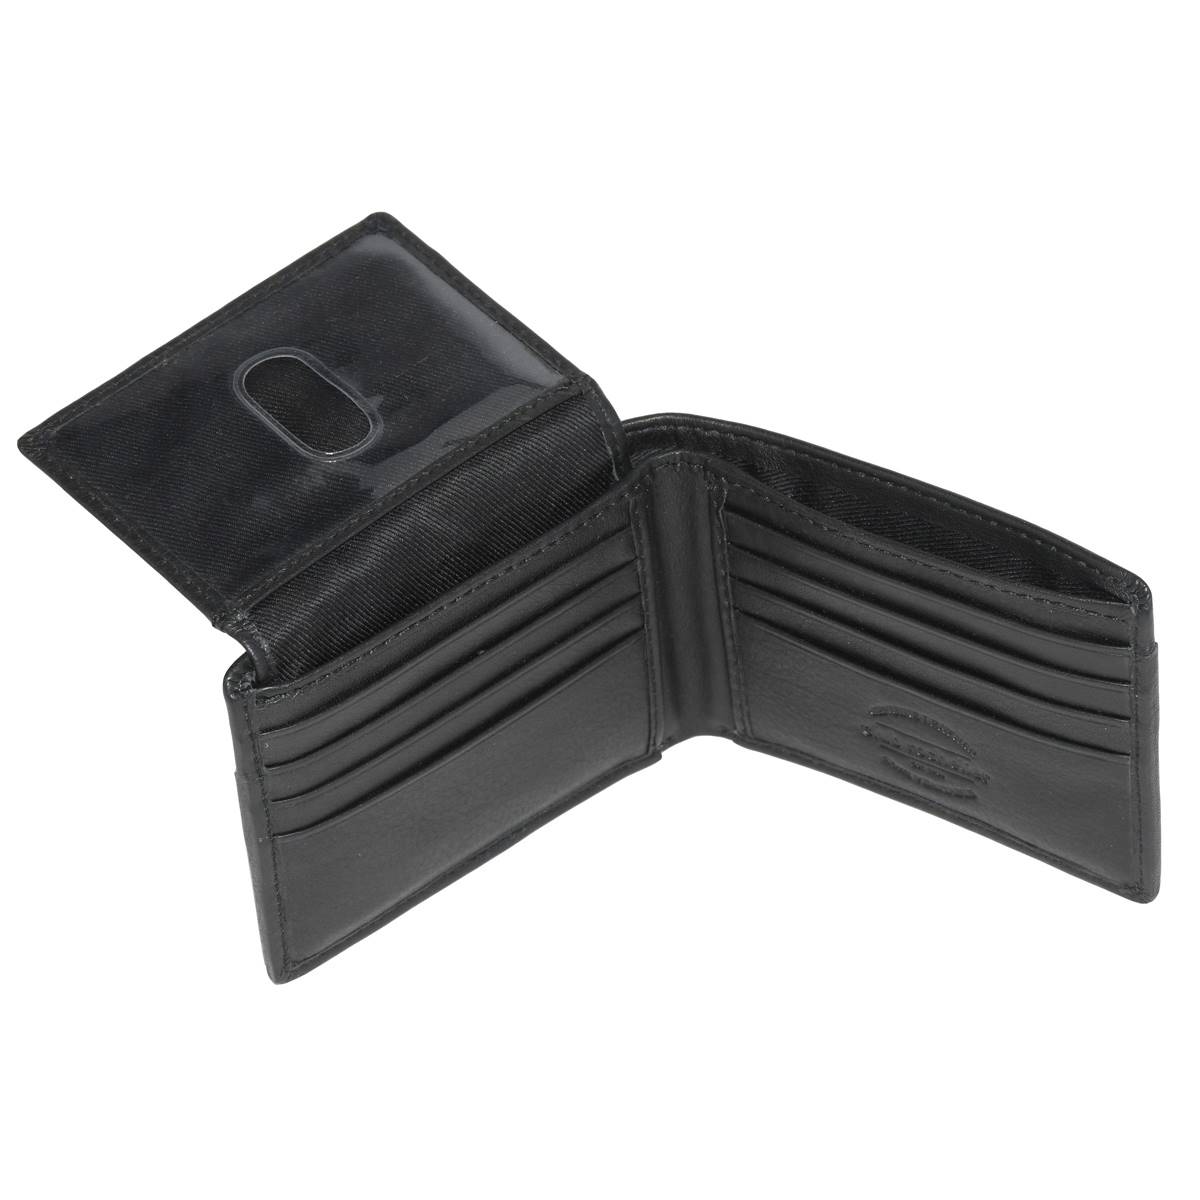 Mens Club Rochelier Slimfold Wallet With Removable ID